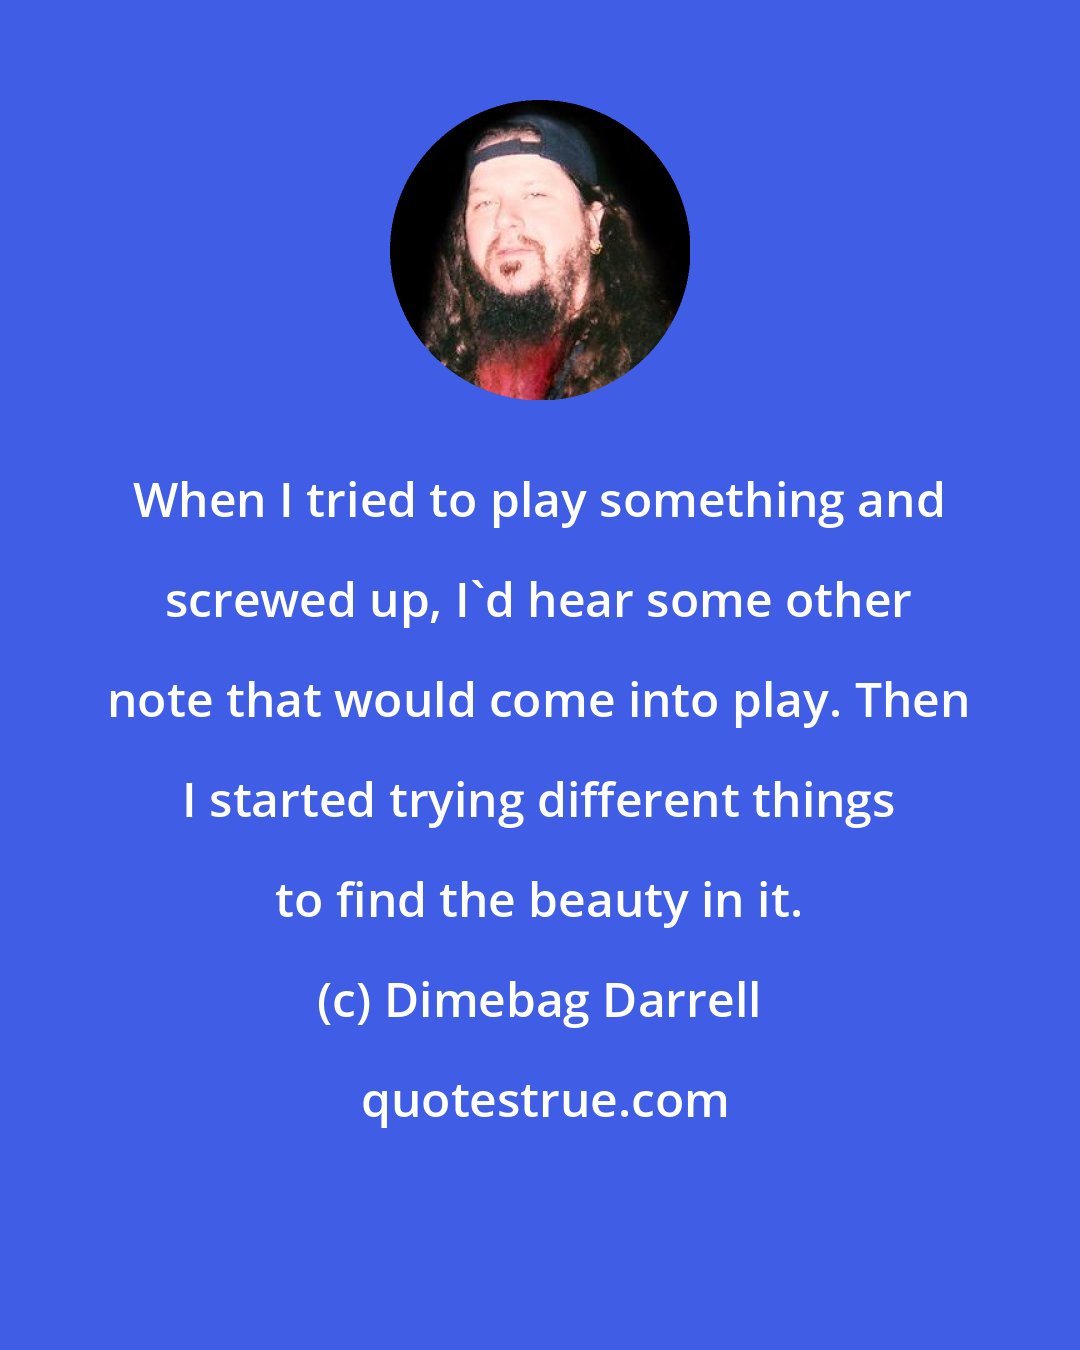 Dimebag Darrell: When I tried to play something and screwed up, I'd hear some other note that would come into play. Then I started trying different things to find the beauty in it.